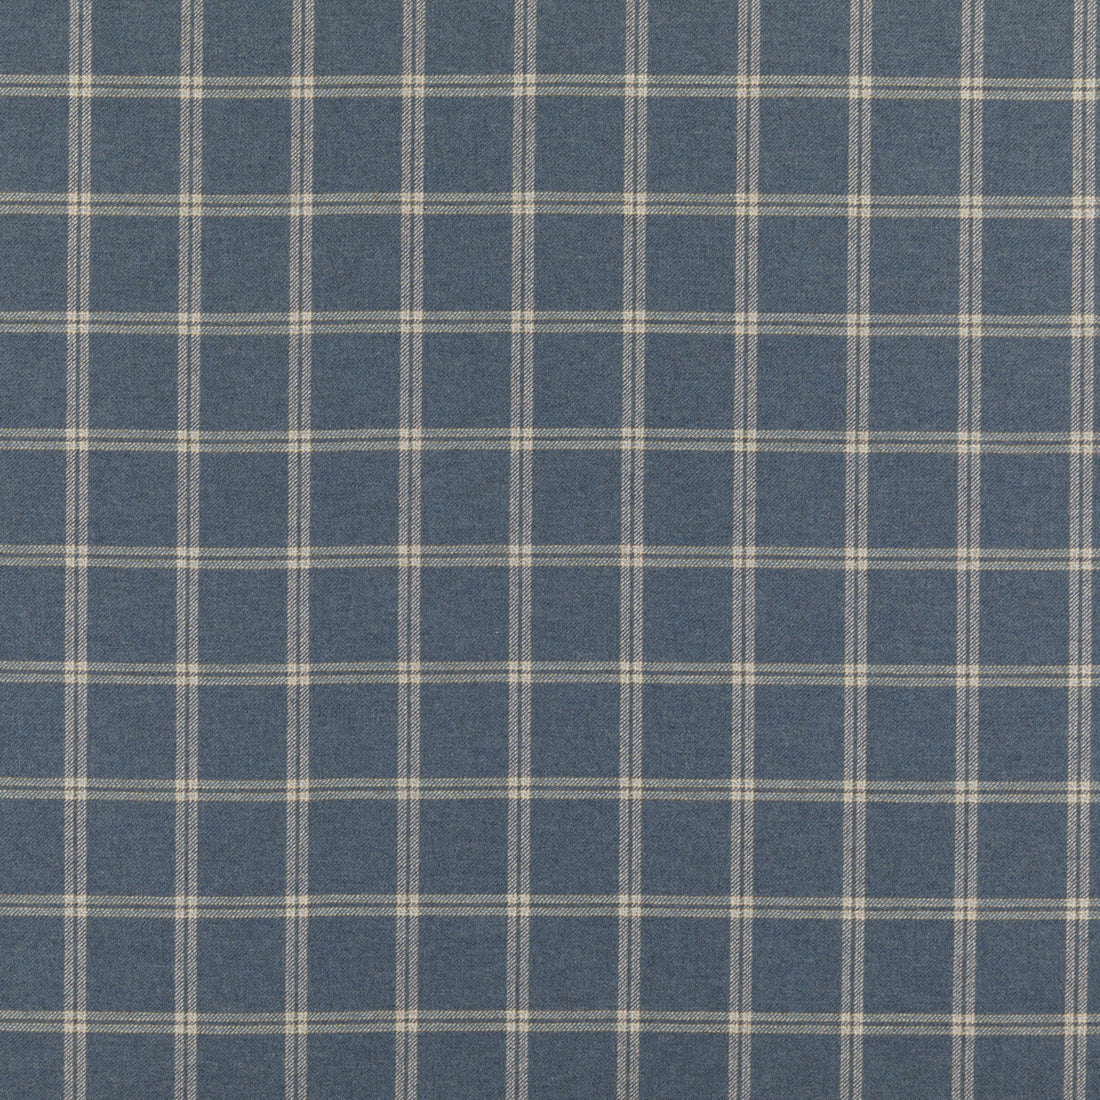 Walton fabric in indigo color - pattern FD775.H10.0 - by Mulberry in the Modern Country collection